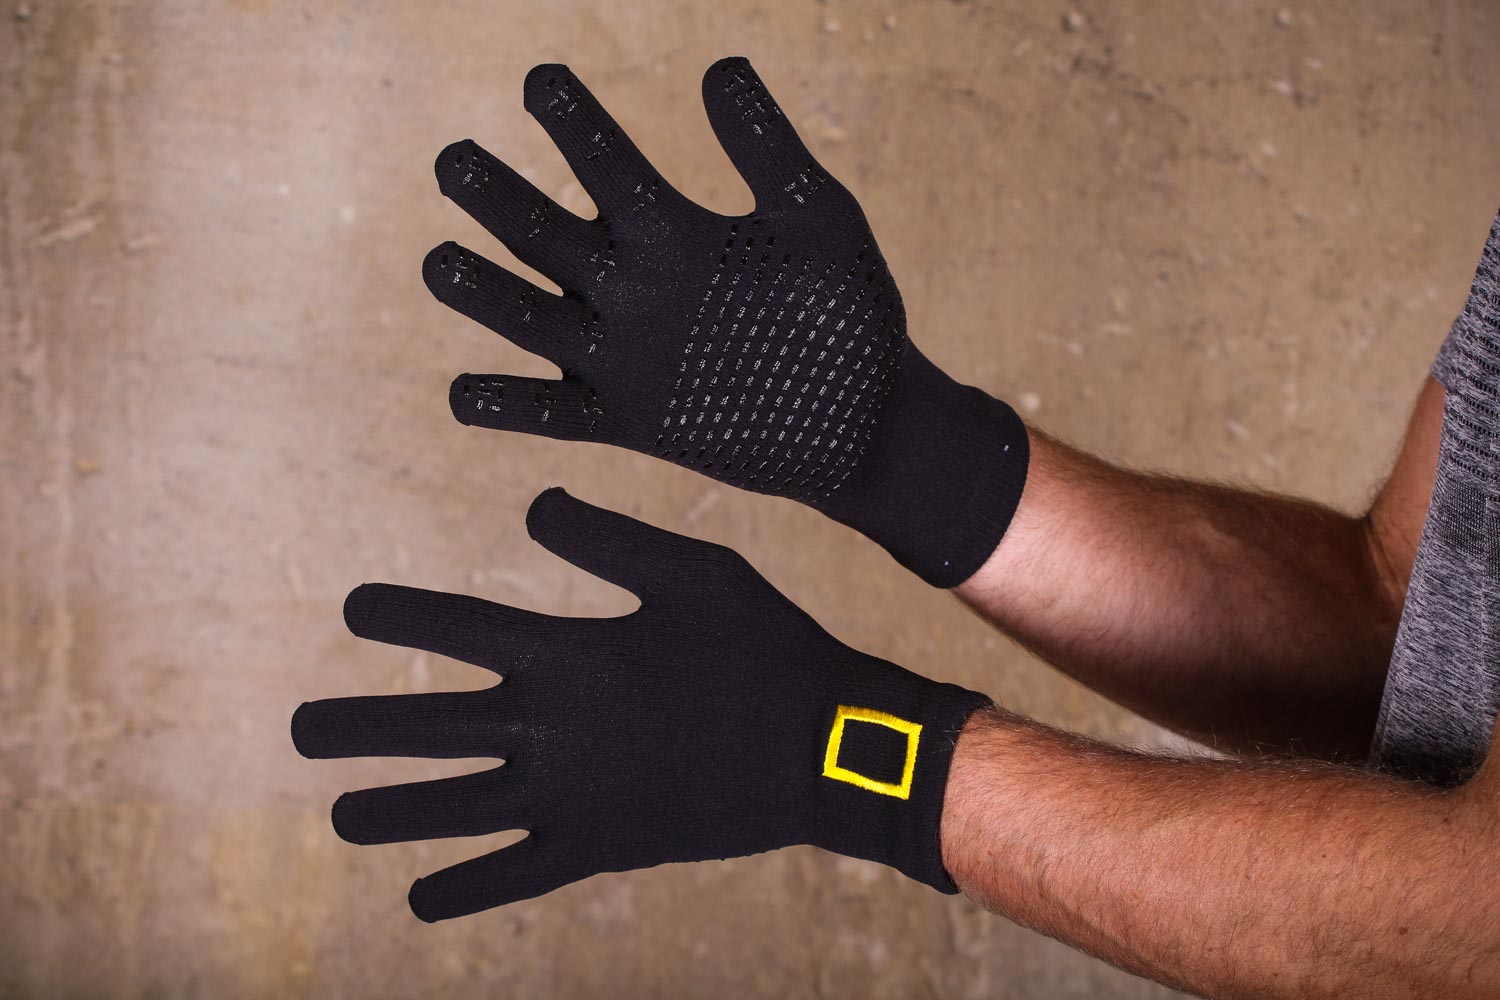 2019/20 National Geographic Knit Waterproof Wool-Blend Gloves by Showers Pass